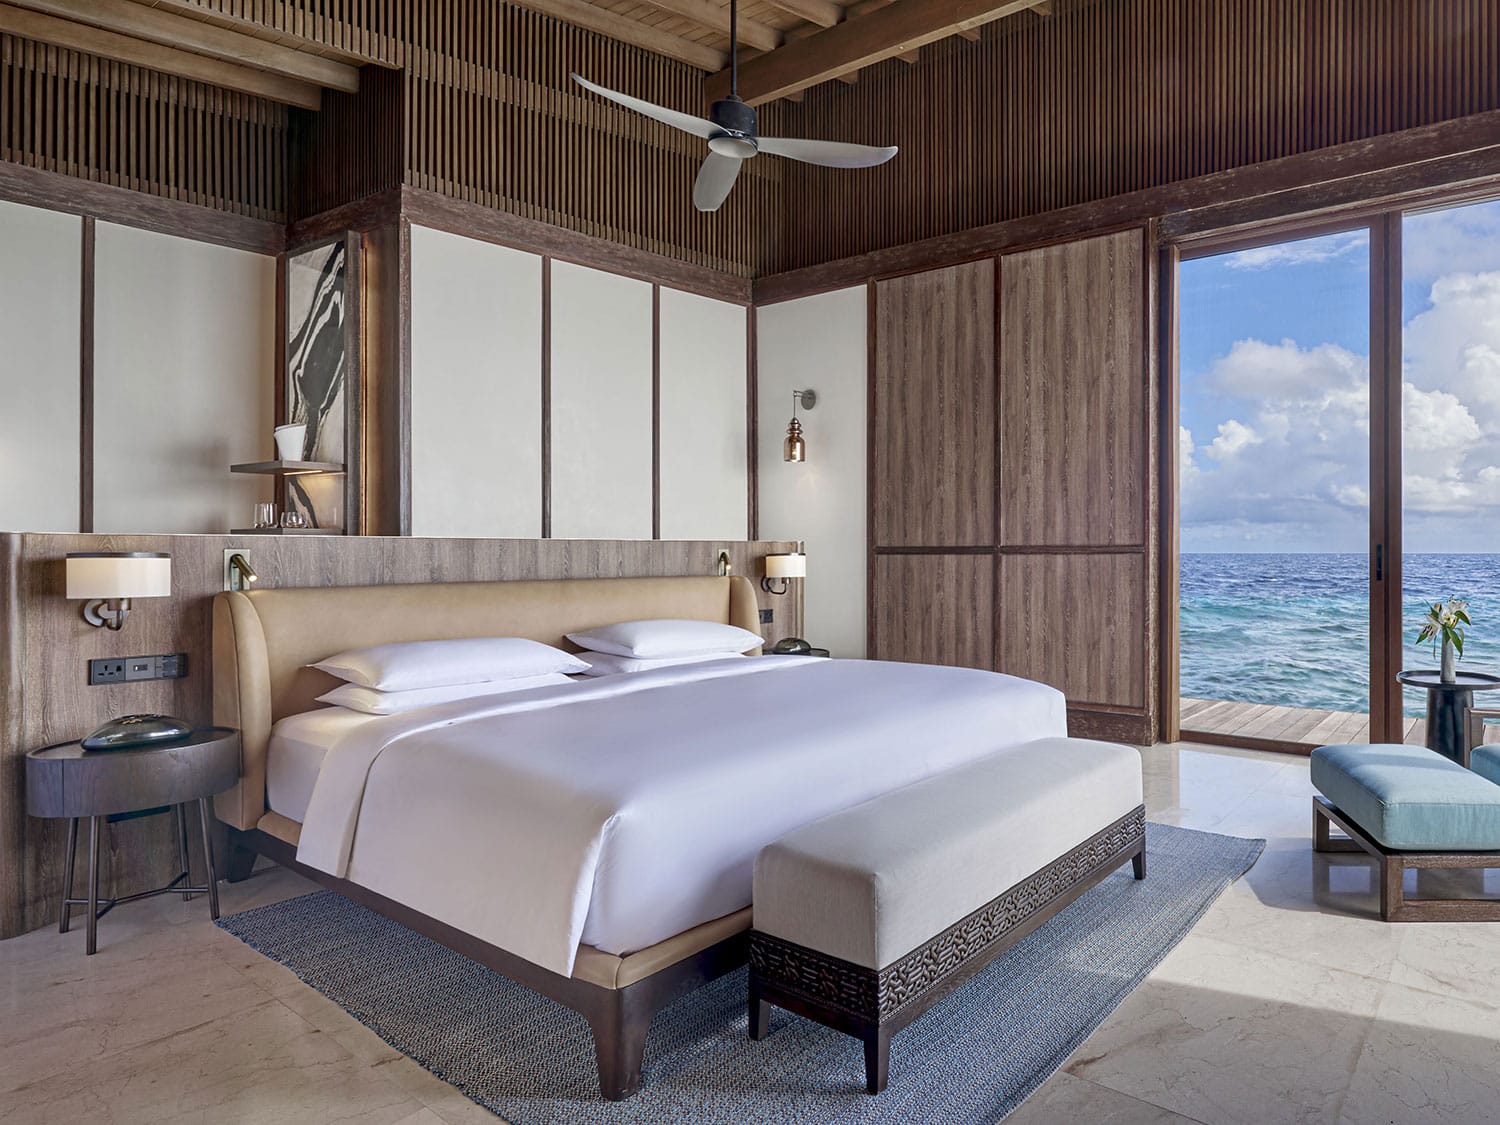 The interior of the master bedroom of the Overwater Reef Residence at Park Hyatt Maldives Hadahaa.